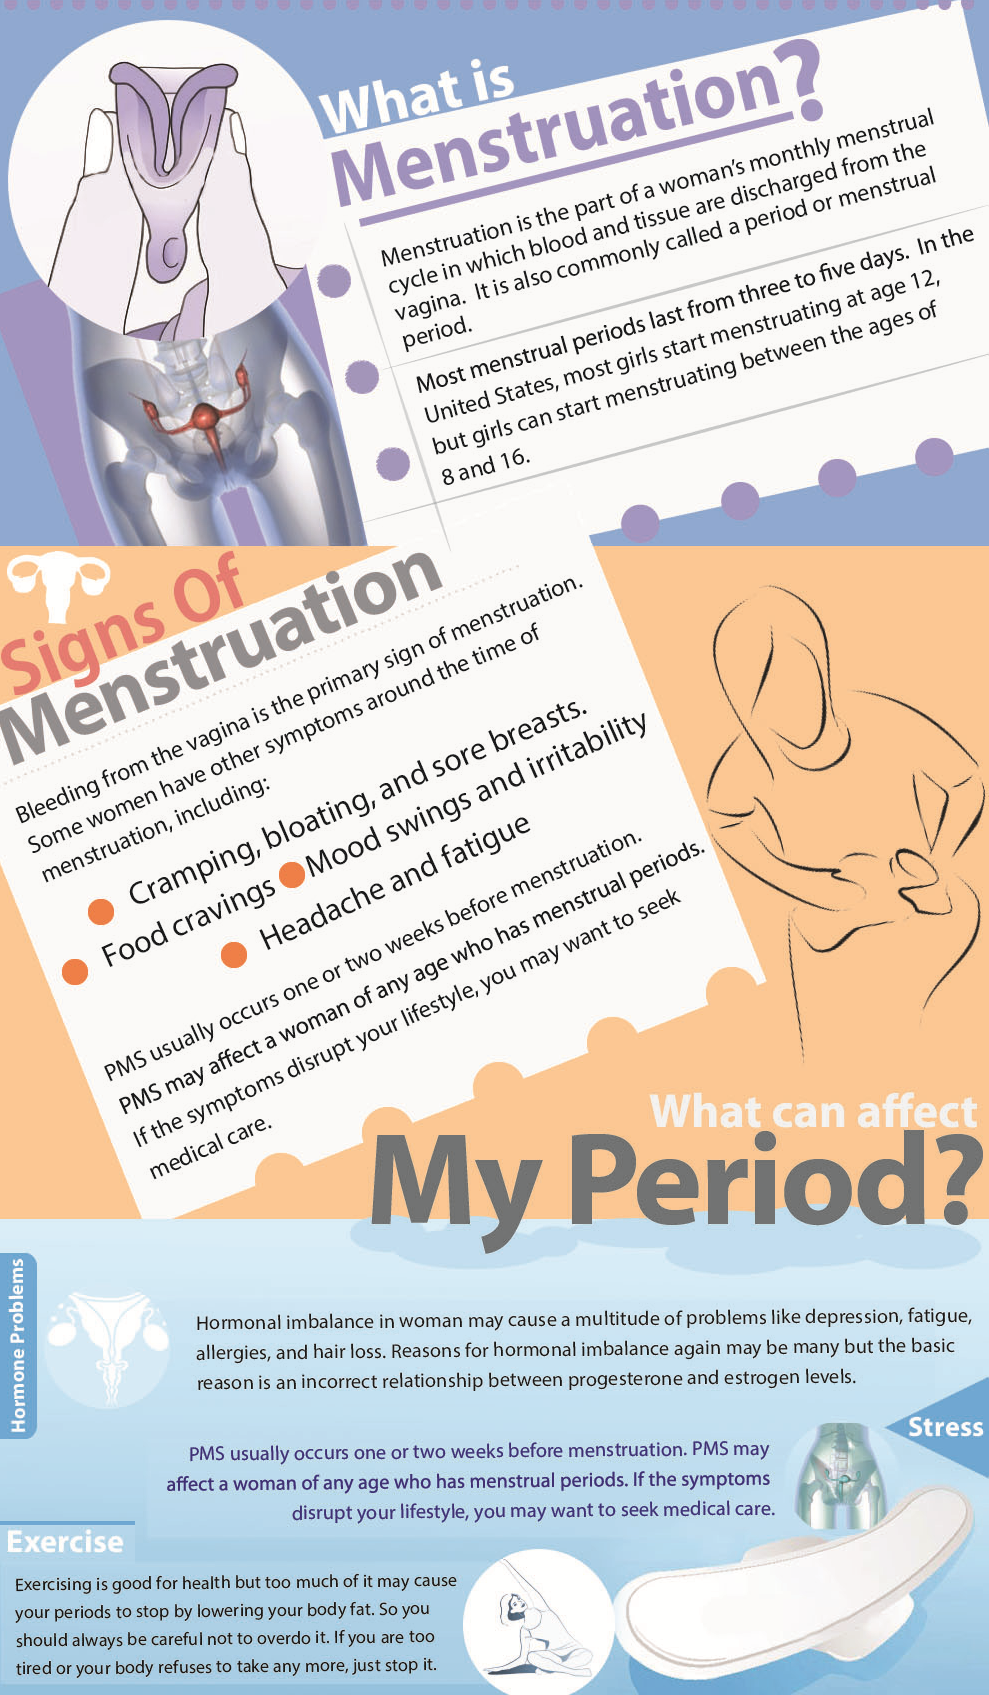 Menstrual Cycle and Menstruation in Women